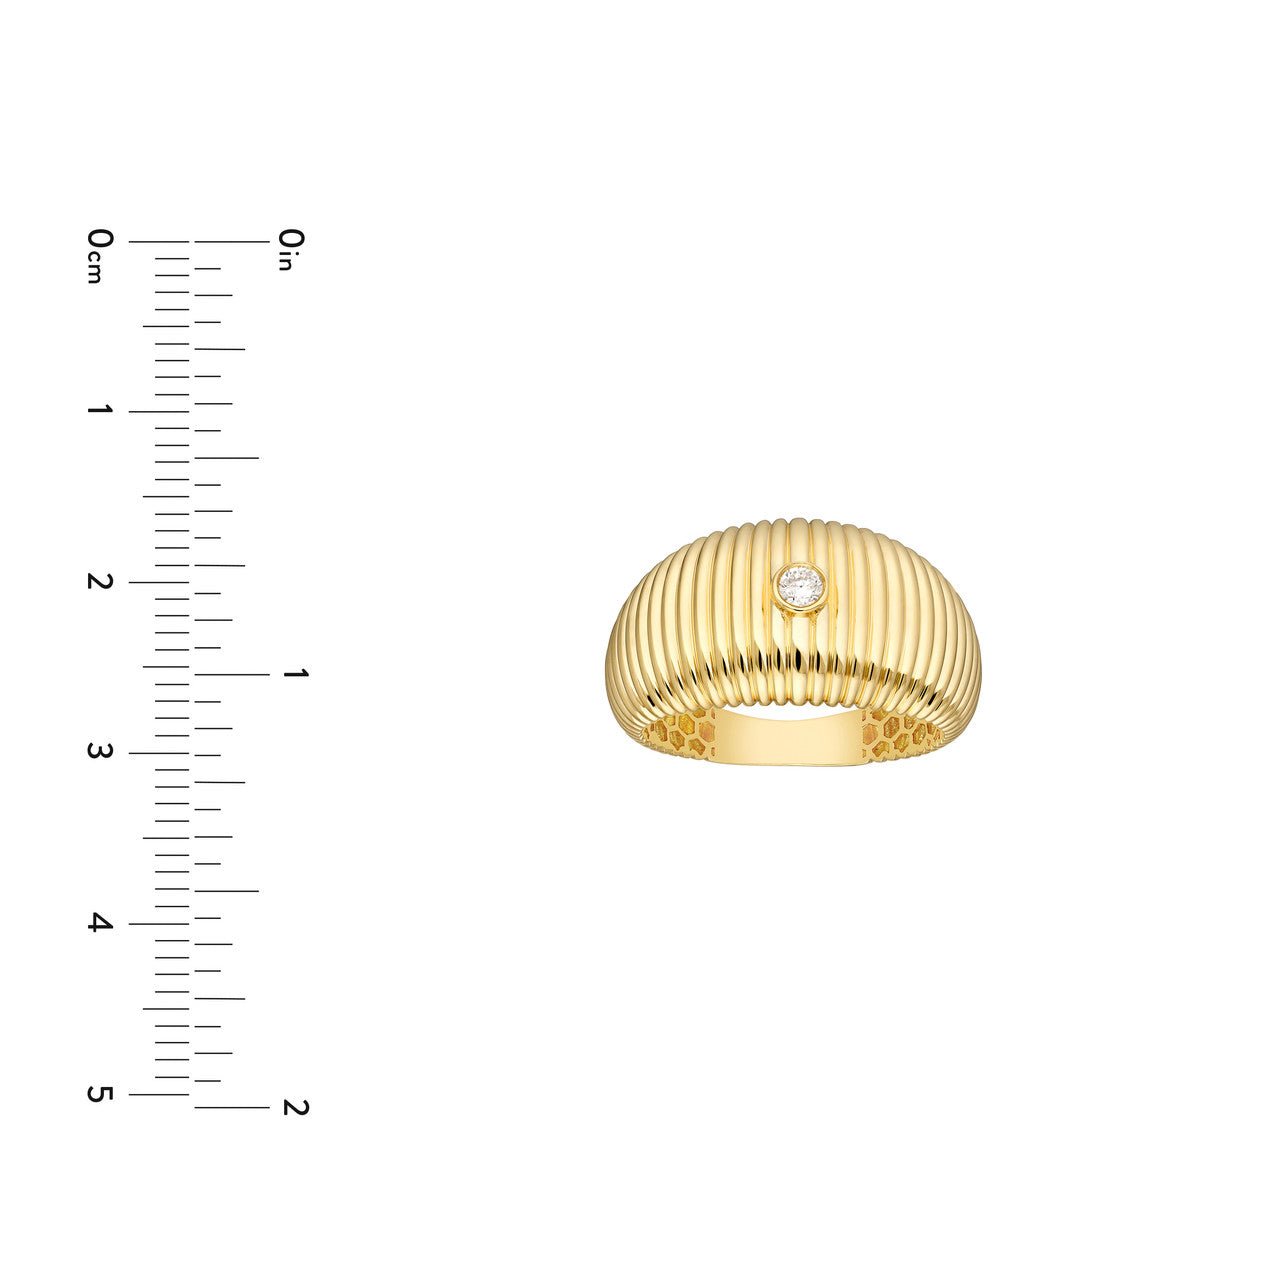 14kt yellow gold/measurements